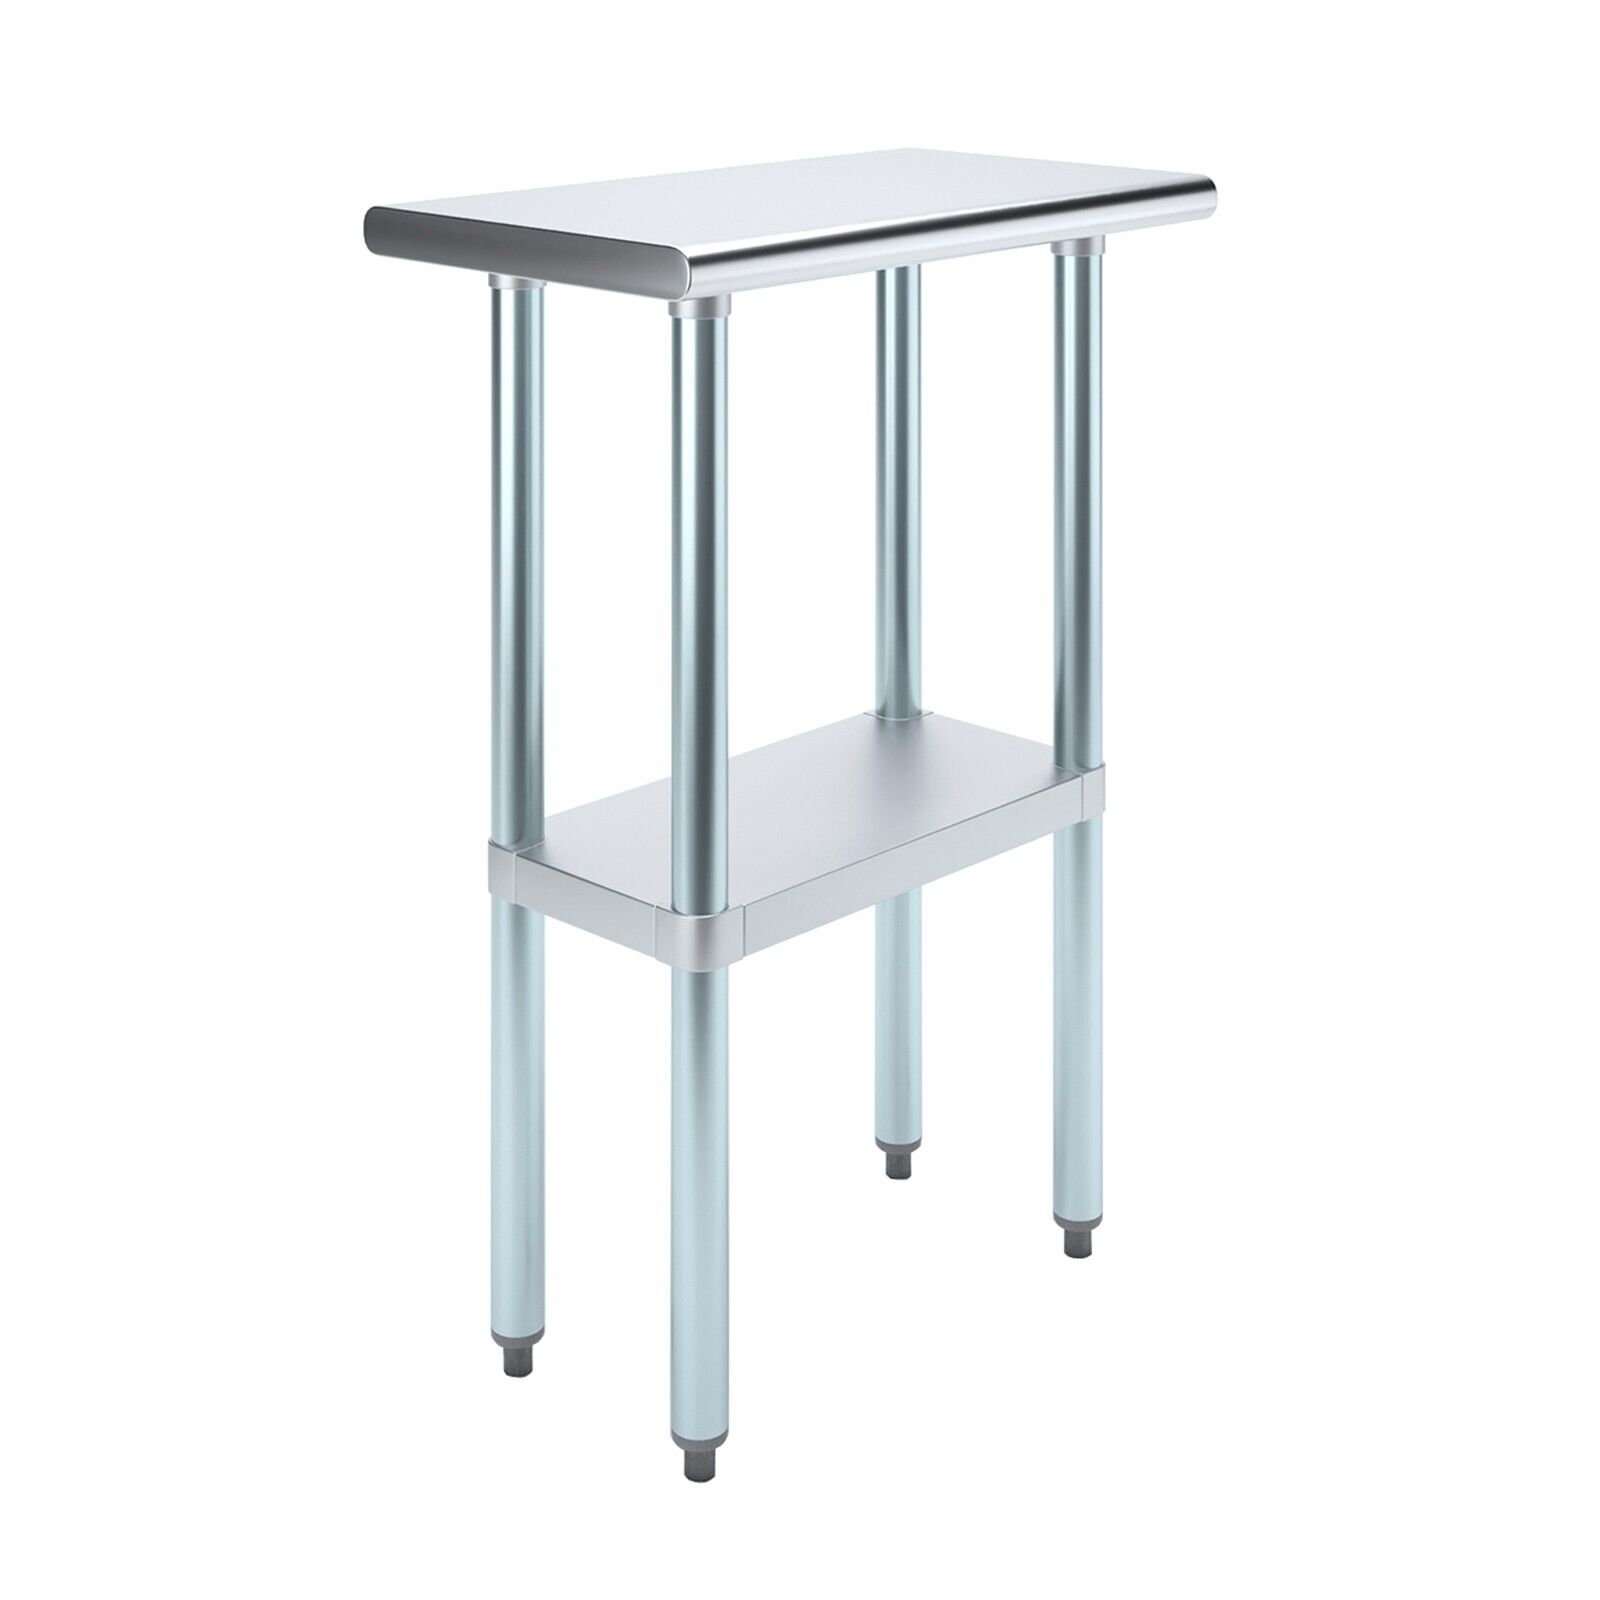 14 in. x 24 in. Stainless Steel Table